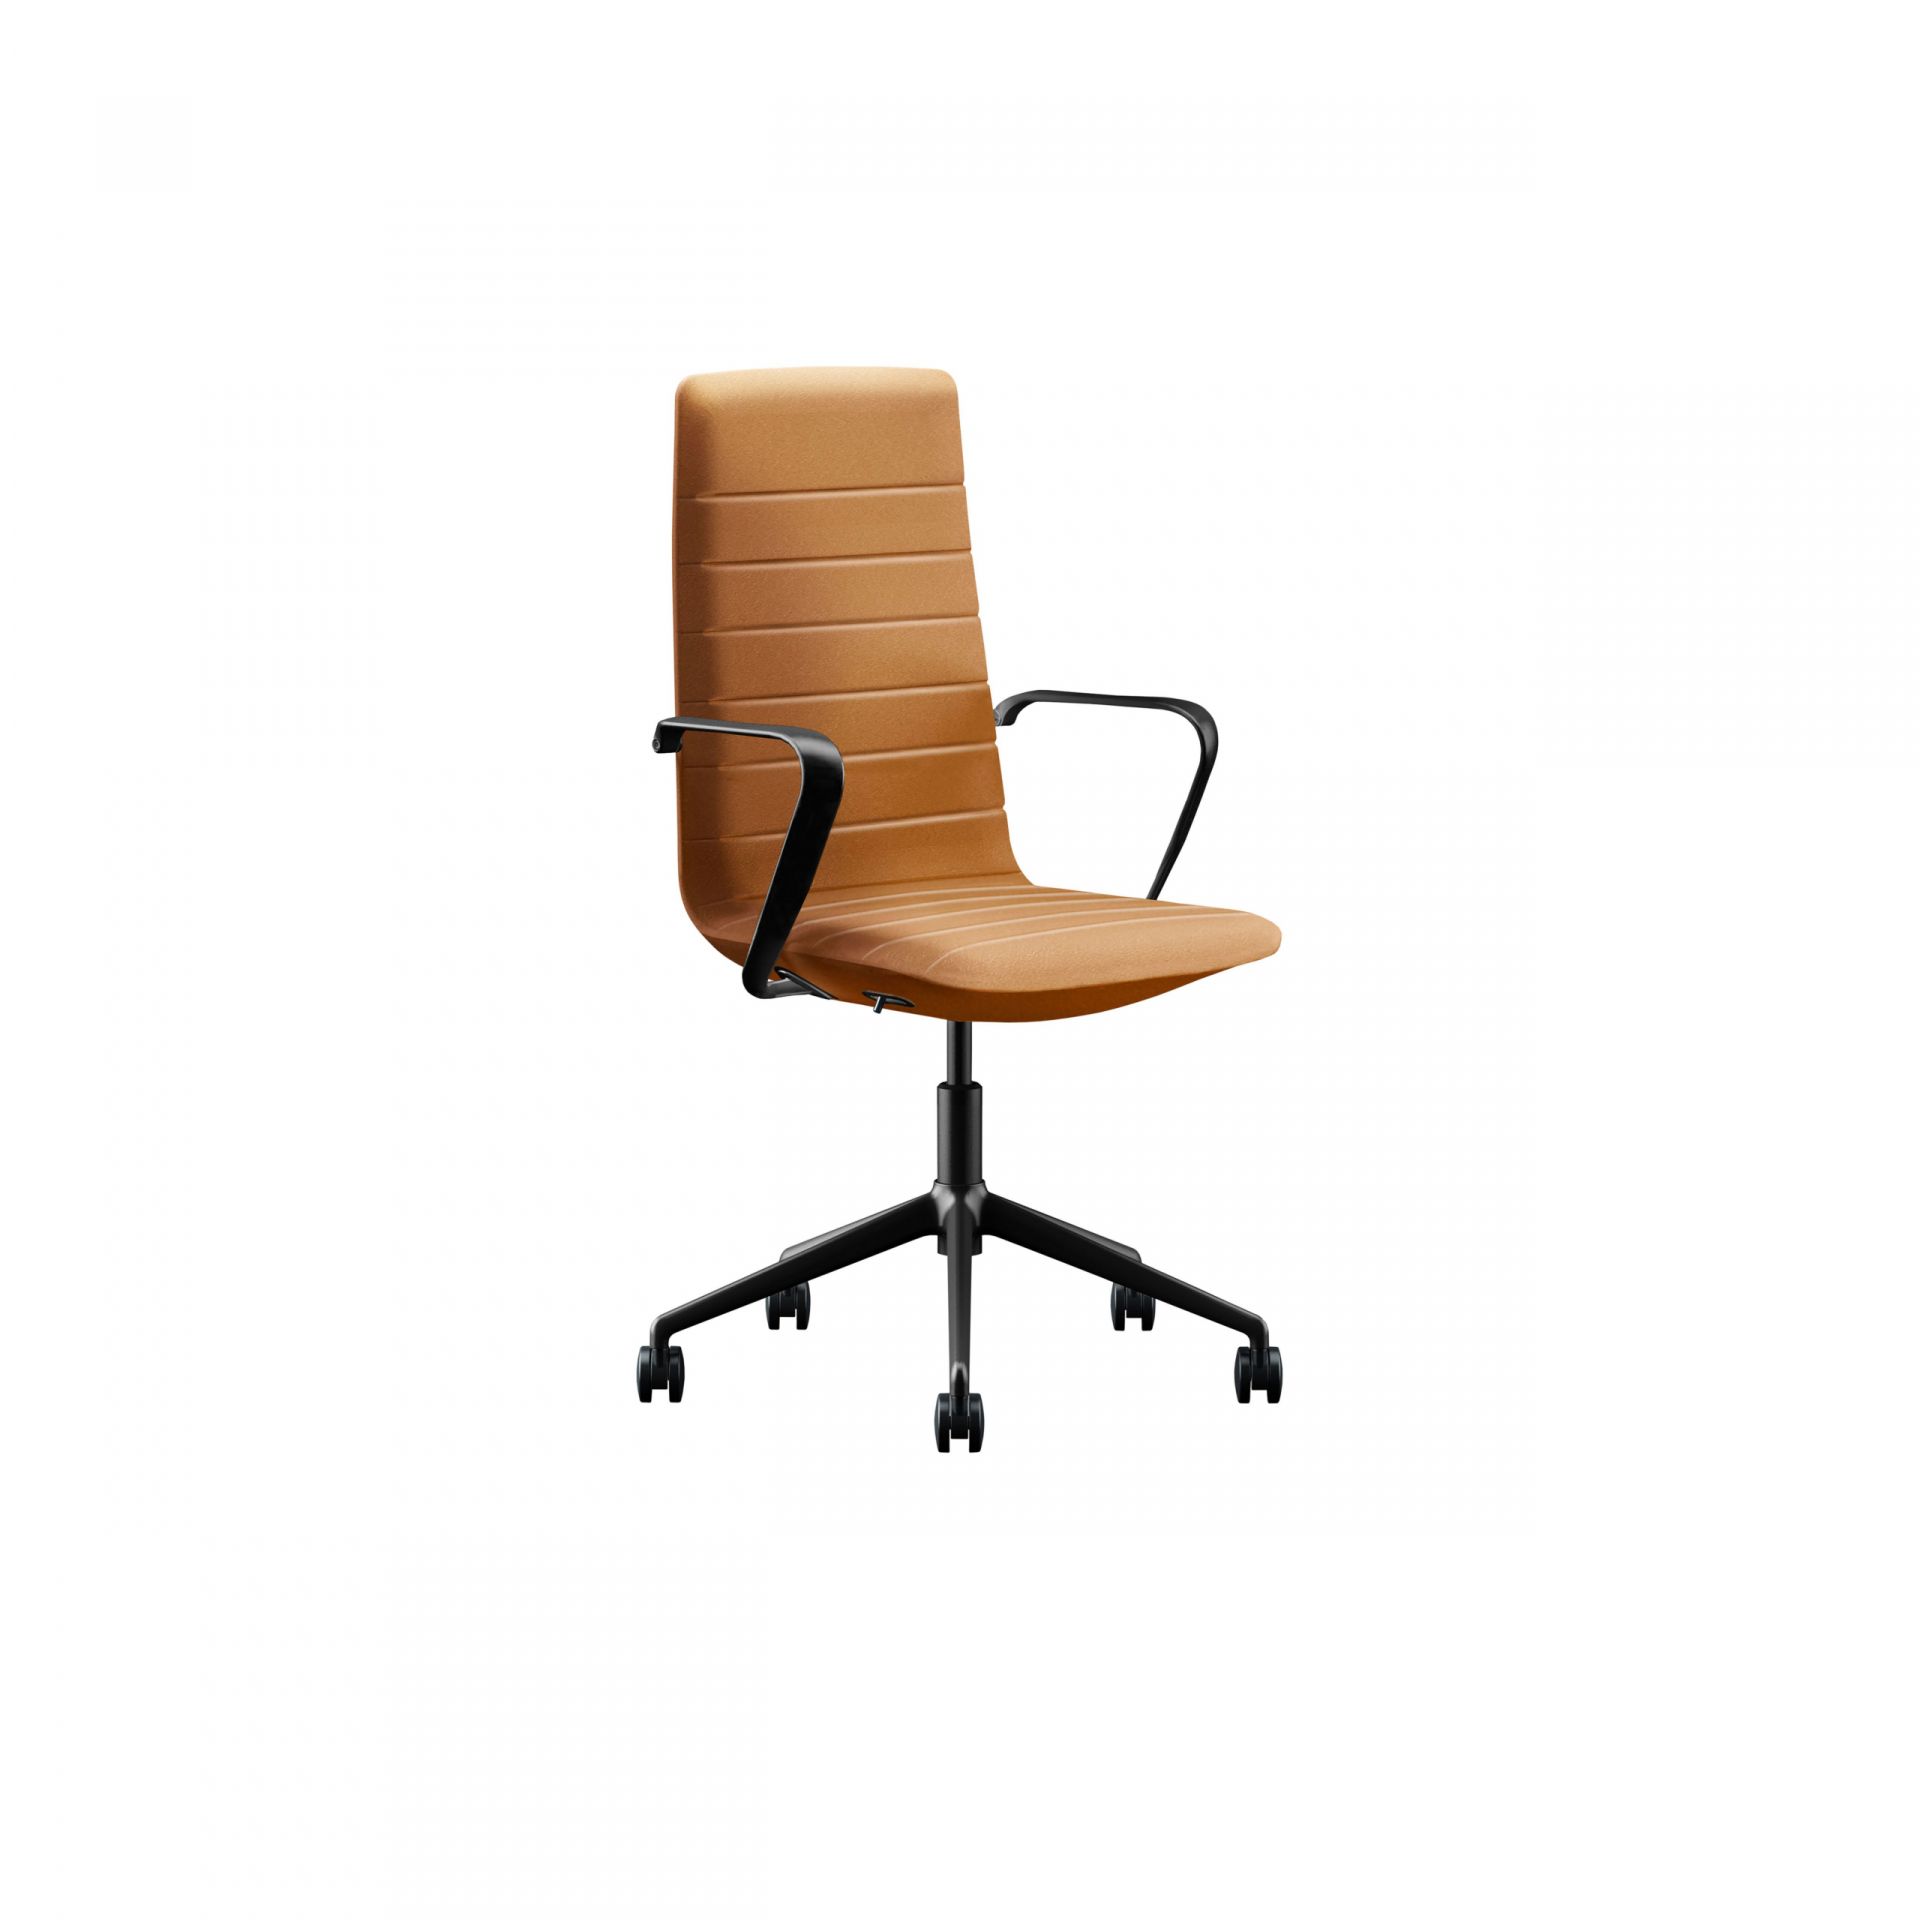 Favor Chair with swivel base